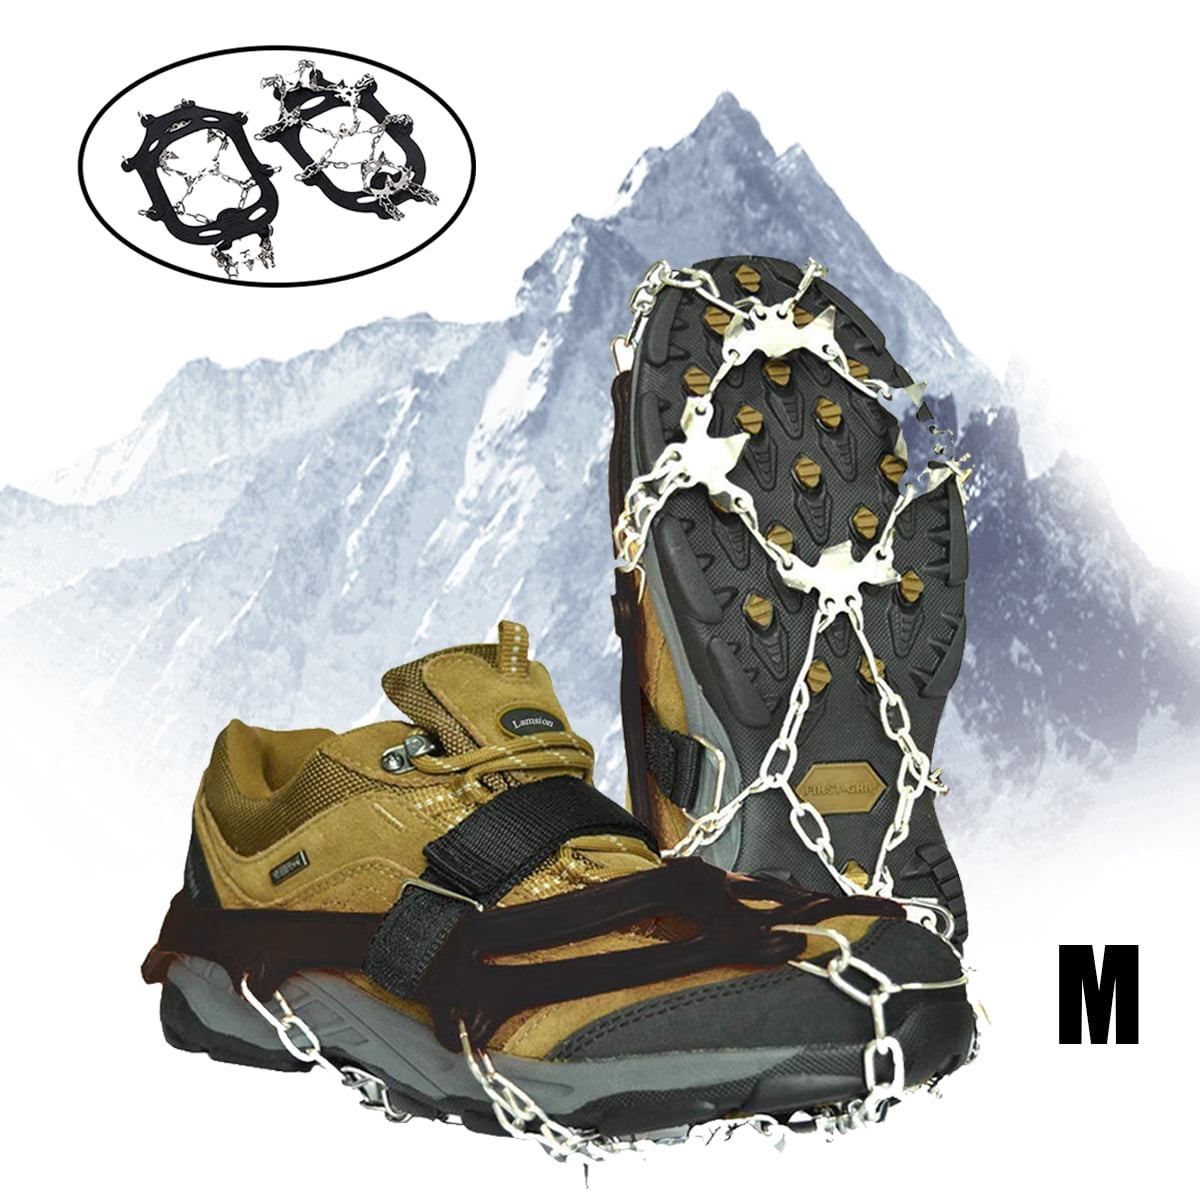 24 Spikes Crampons Ice Cleats Traction Snow Grips for Boots Shoes,Anti-Slip Stainless Steel Spikes,Microspikes for Hiking Fishing Walking Climbing Jogging Mountaineering. 